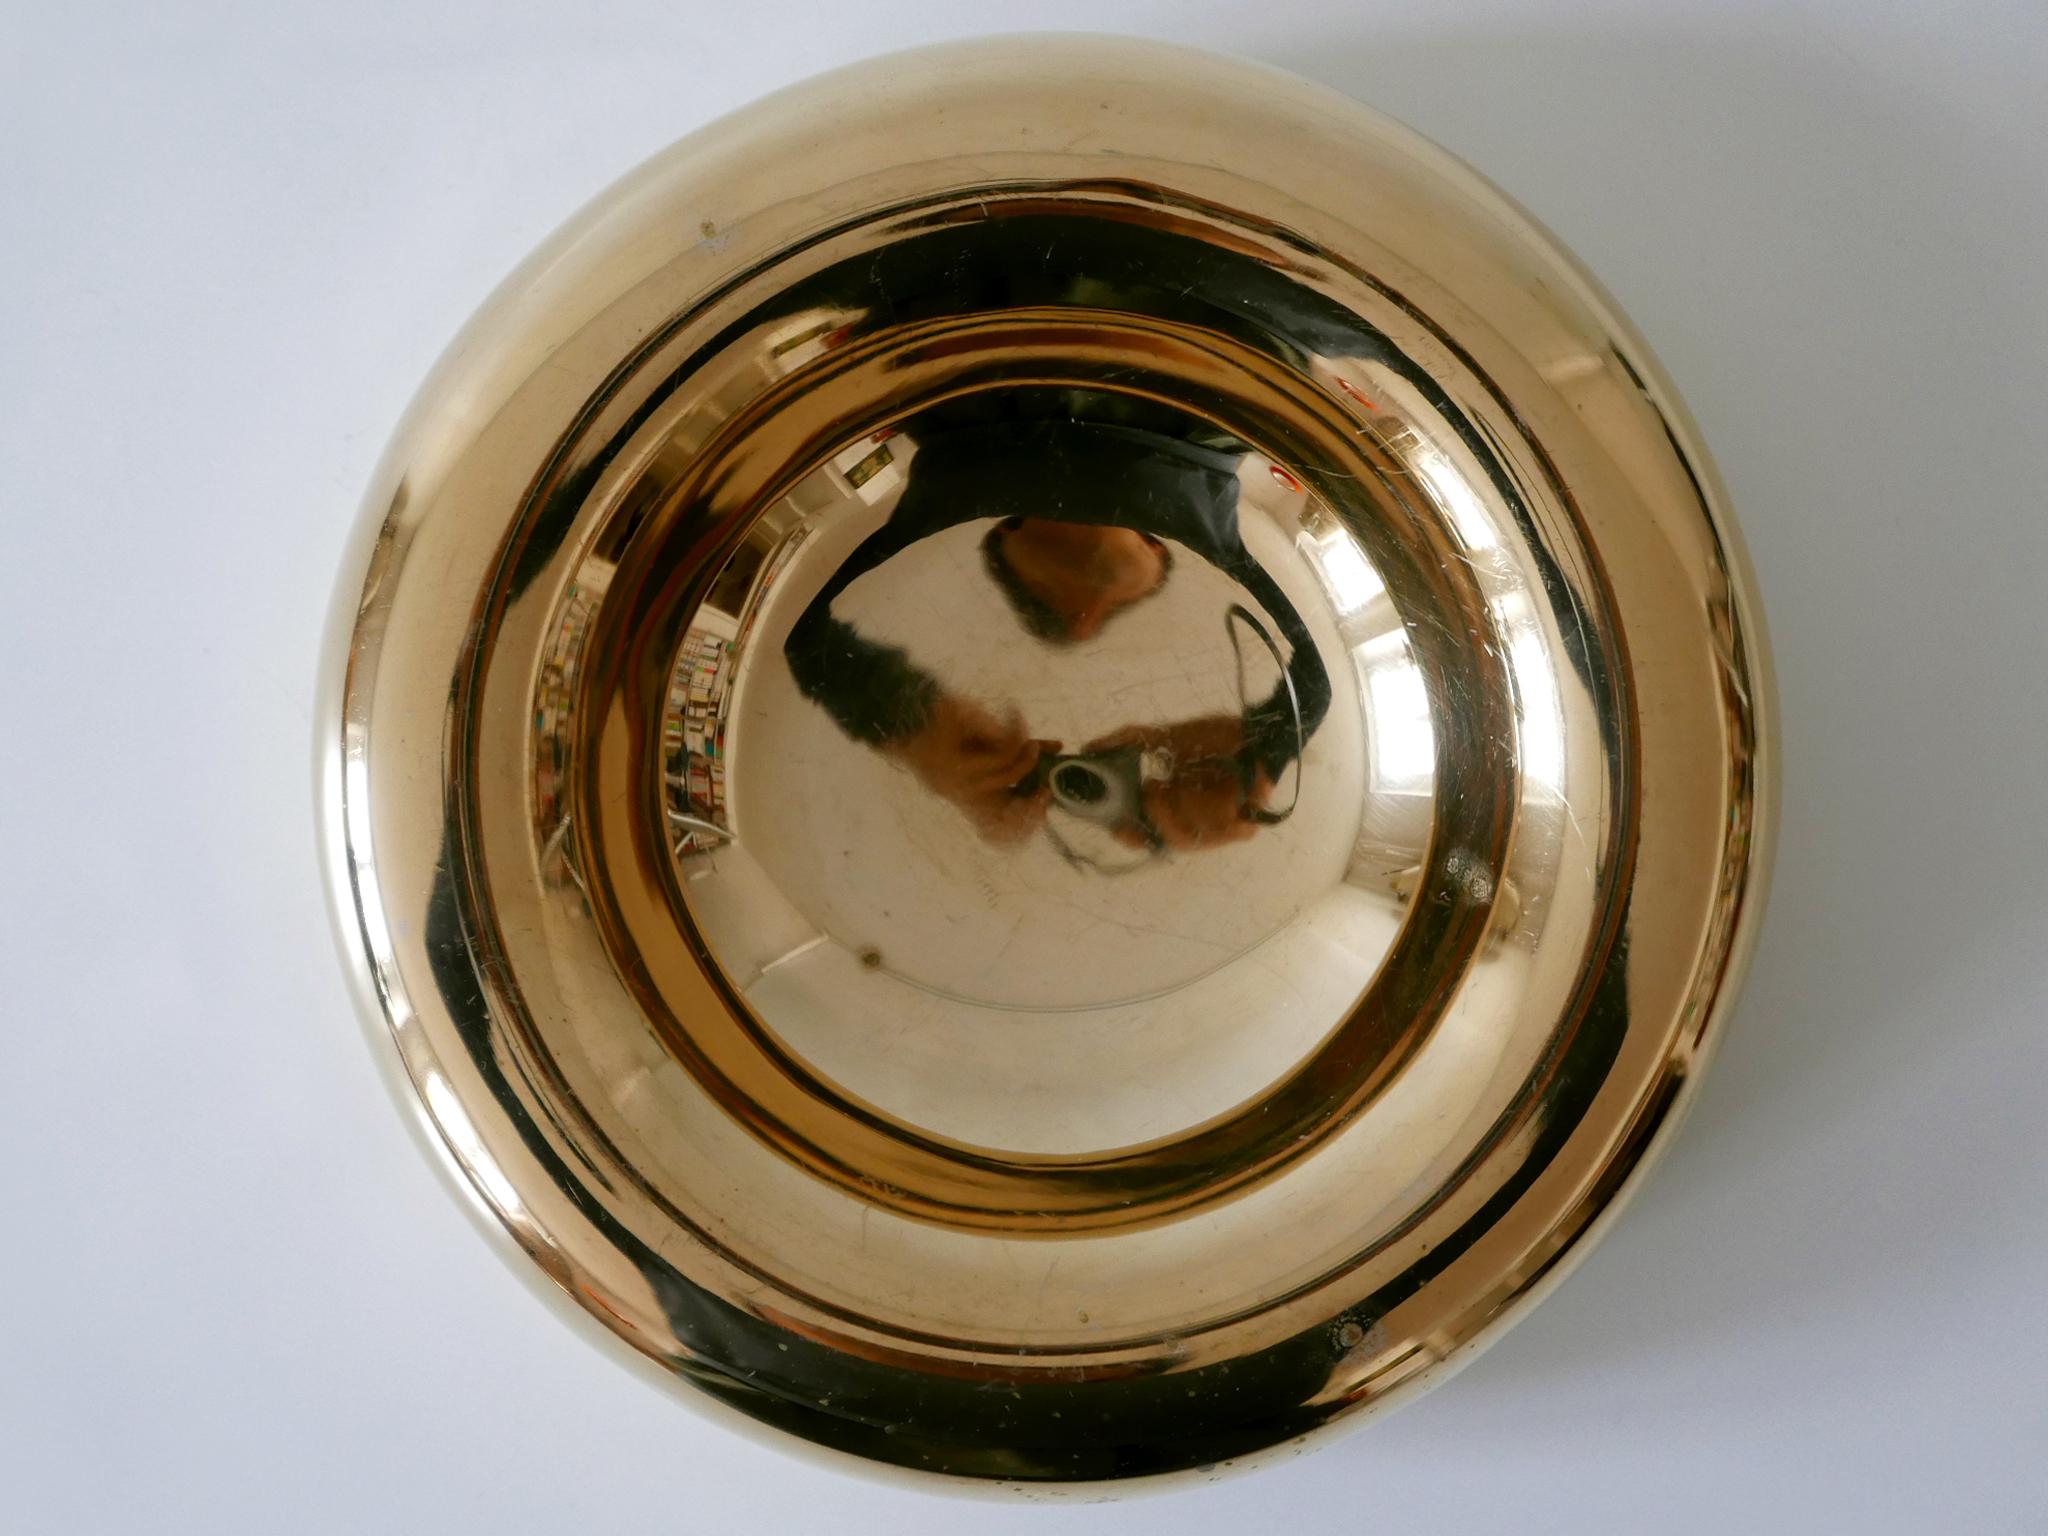 Extremely rare and elegant Mid-Century Modern brass bowl by Ingo Maurer for Design M, Germany, 1970s.

Executed in solid brass.

Good original overall condition. Wear consistent with use and age.